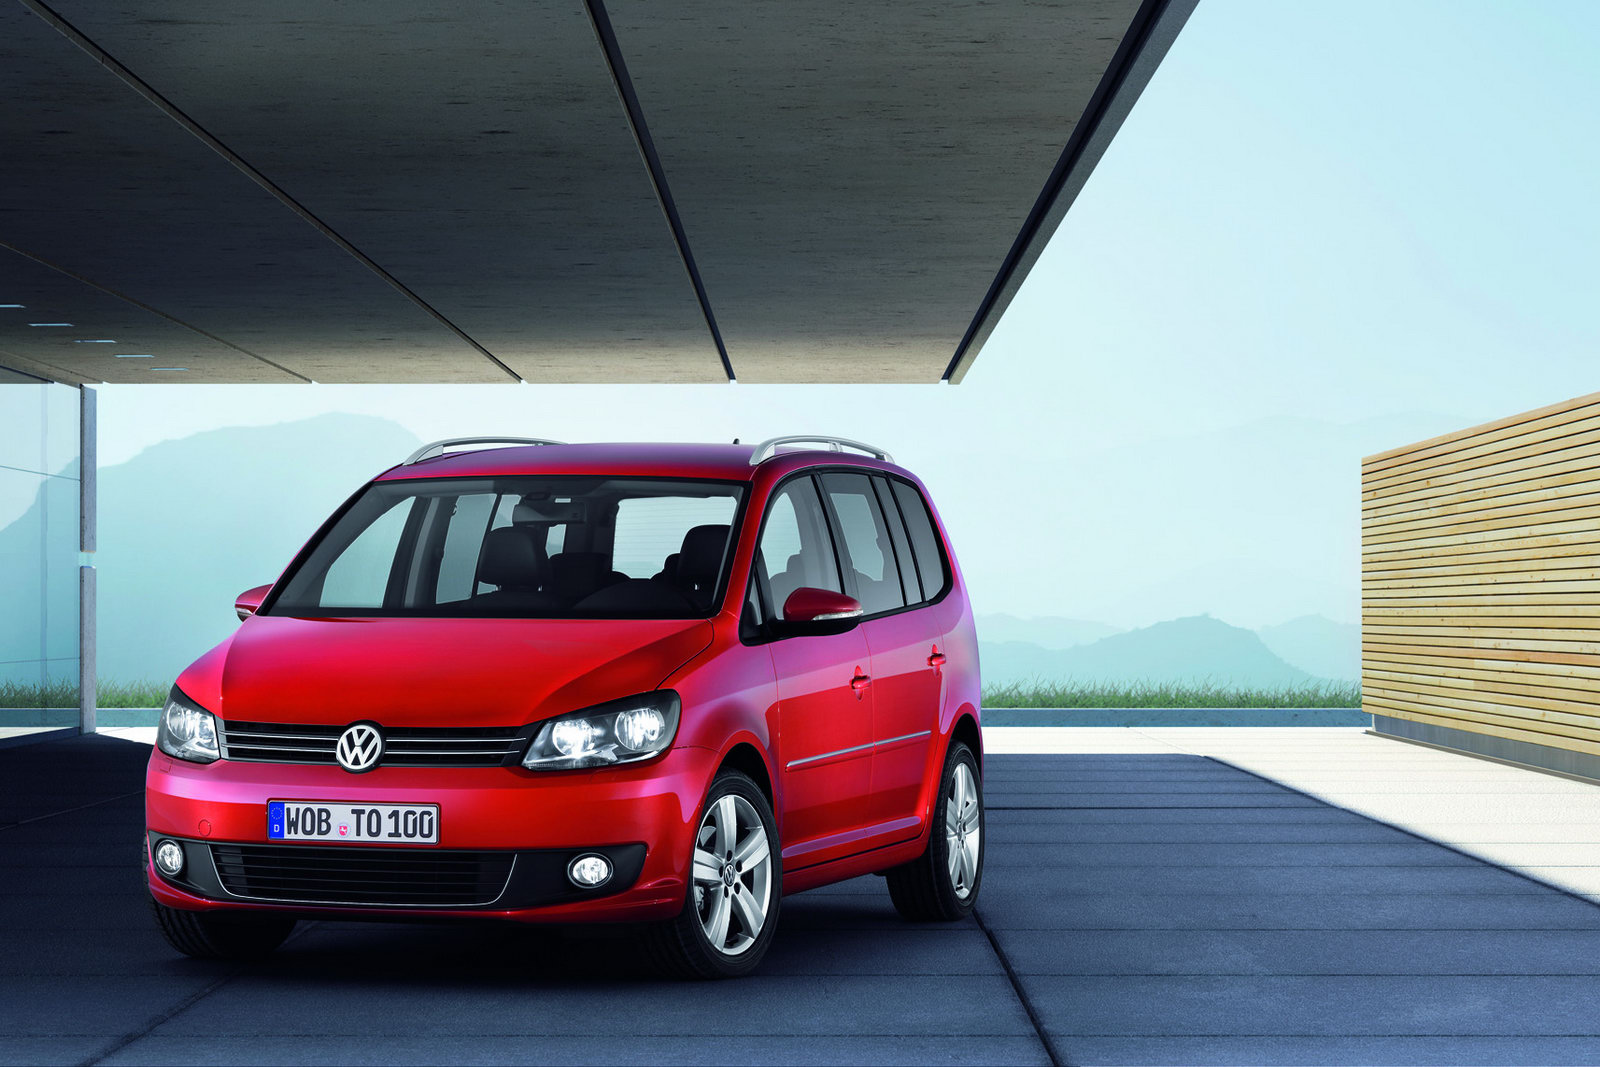 2011 Volkswagen Touran 7-Seater MPV Receives Second Mid-Life Facelift ...